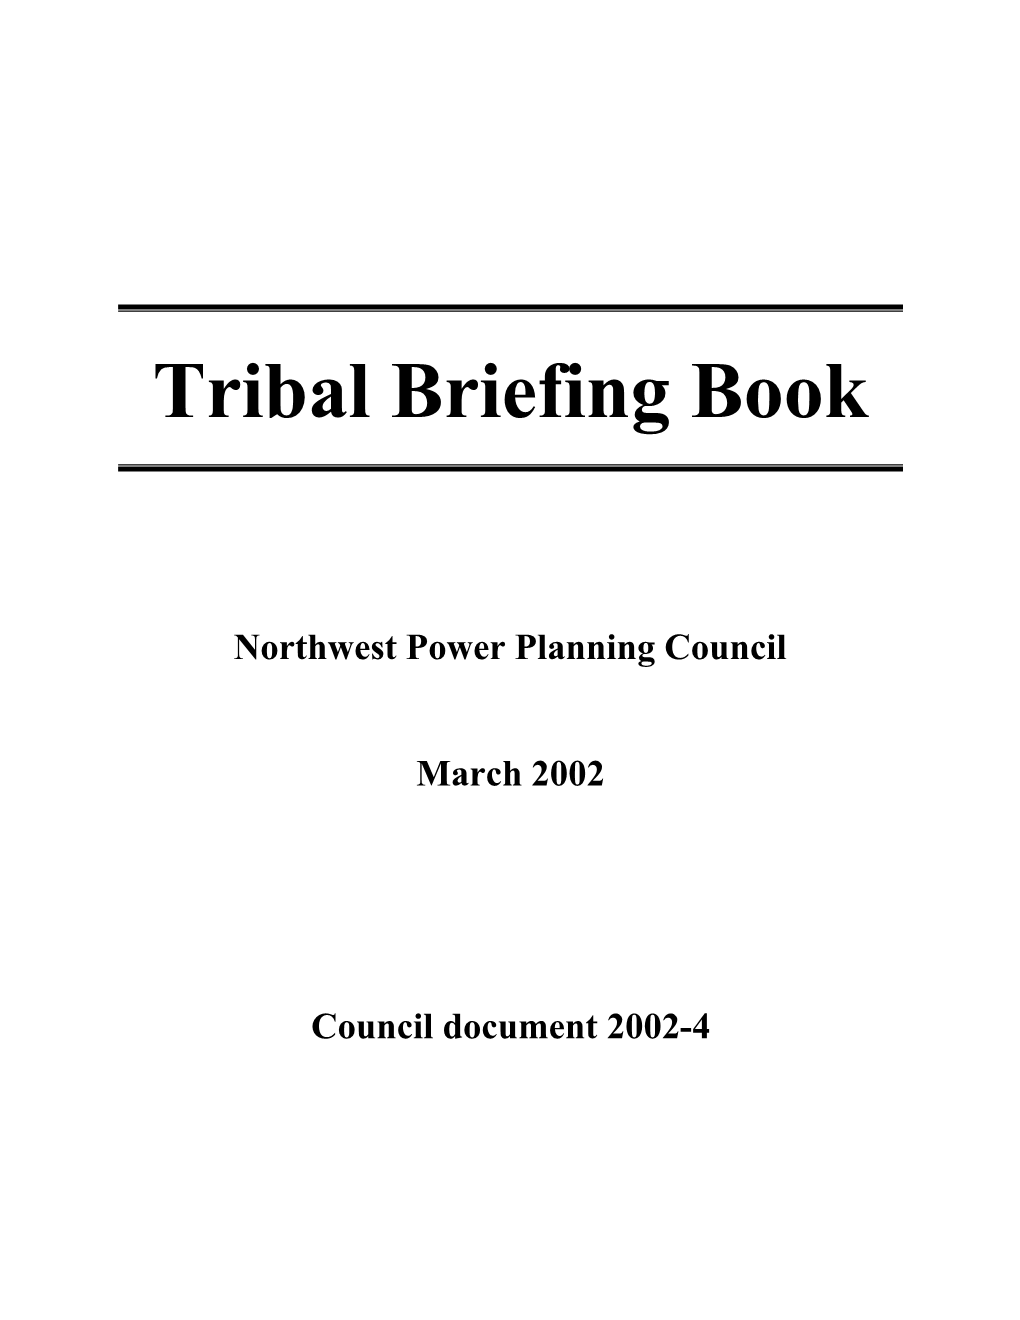 Tribal Briefing Book, Document 2002-4